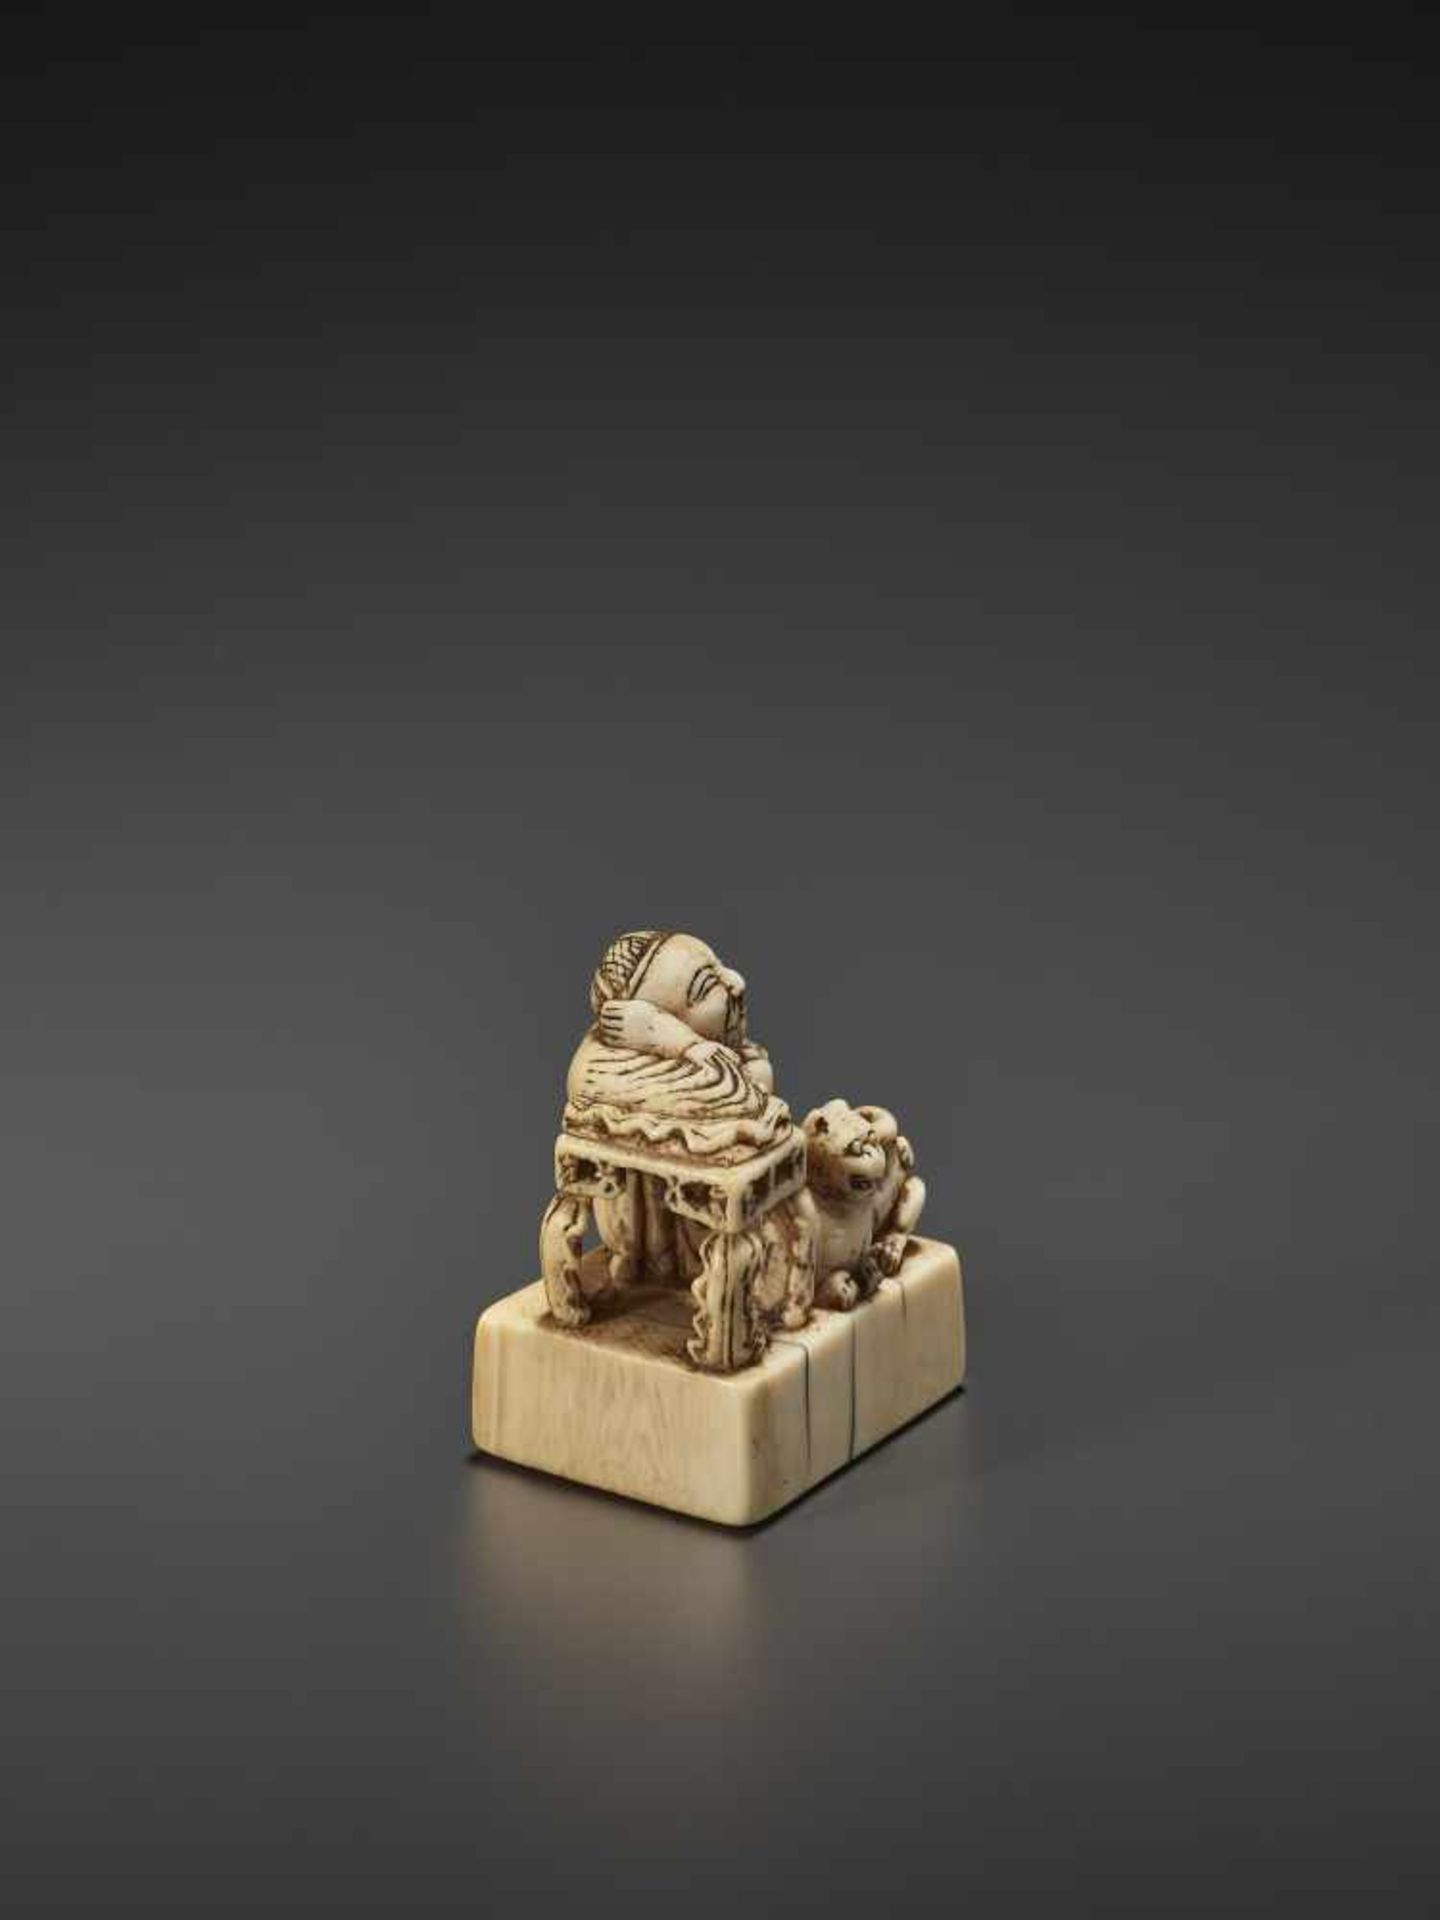 AN UNUSUAL AND EARLY IVORY NETSUKE OF A CHINESE SAGE WITH TIGER Unsigned, ivory netsukeJapan, 18th - Image 6 of 9